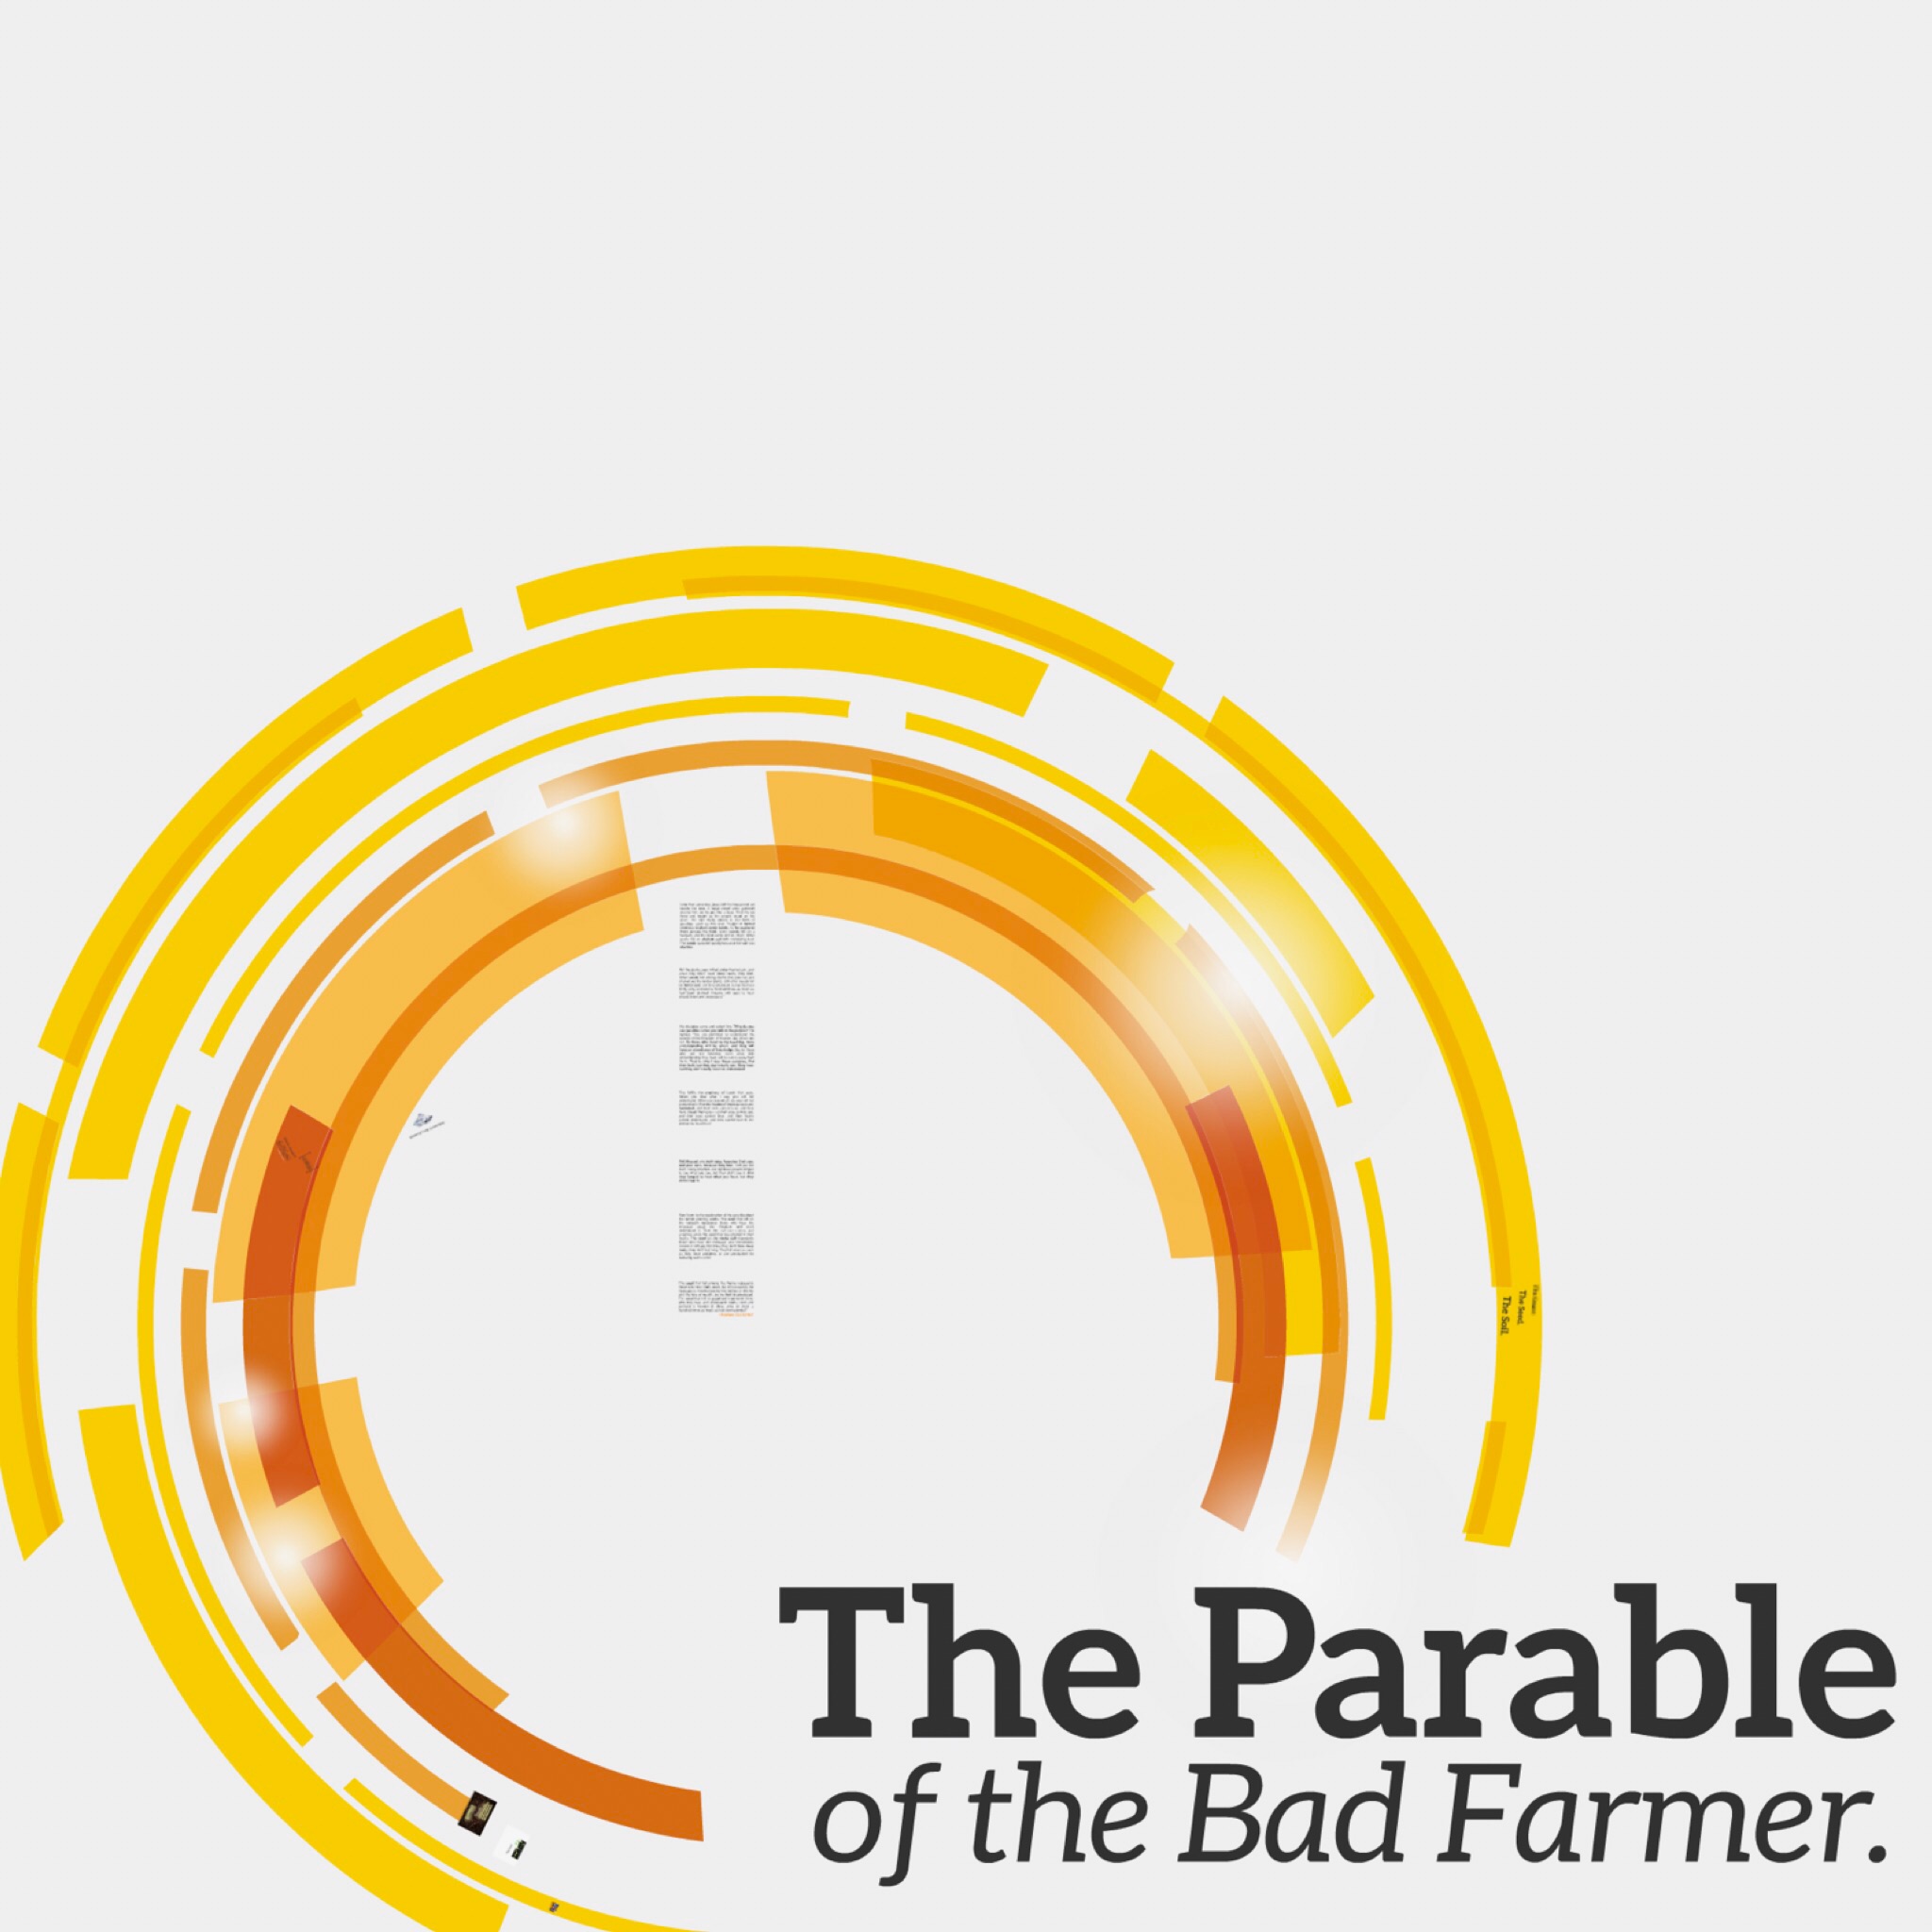 The Parable of the Bad Farmer